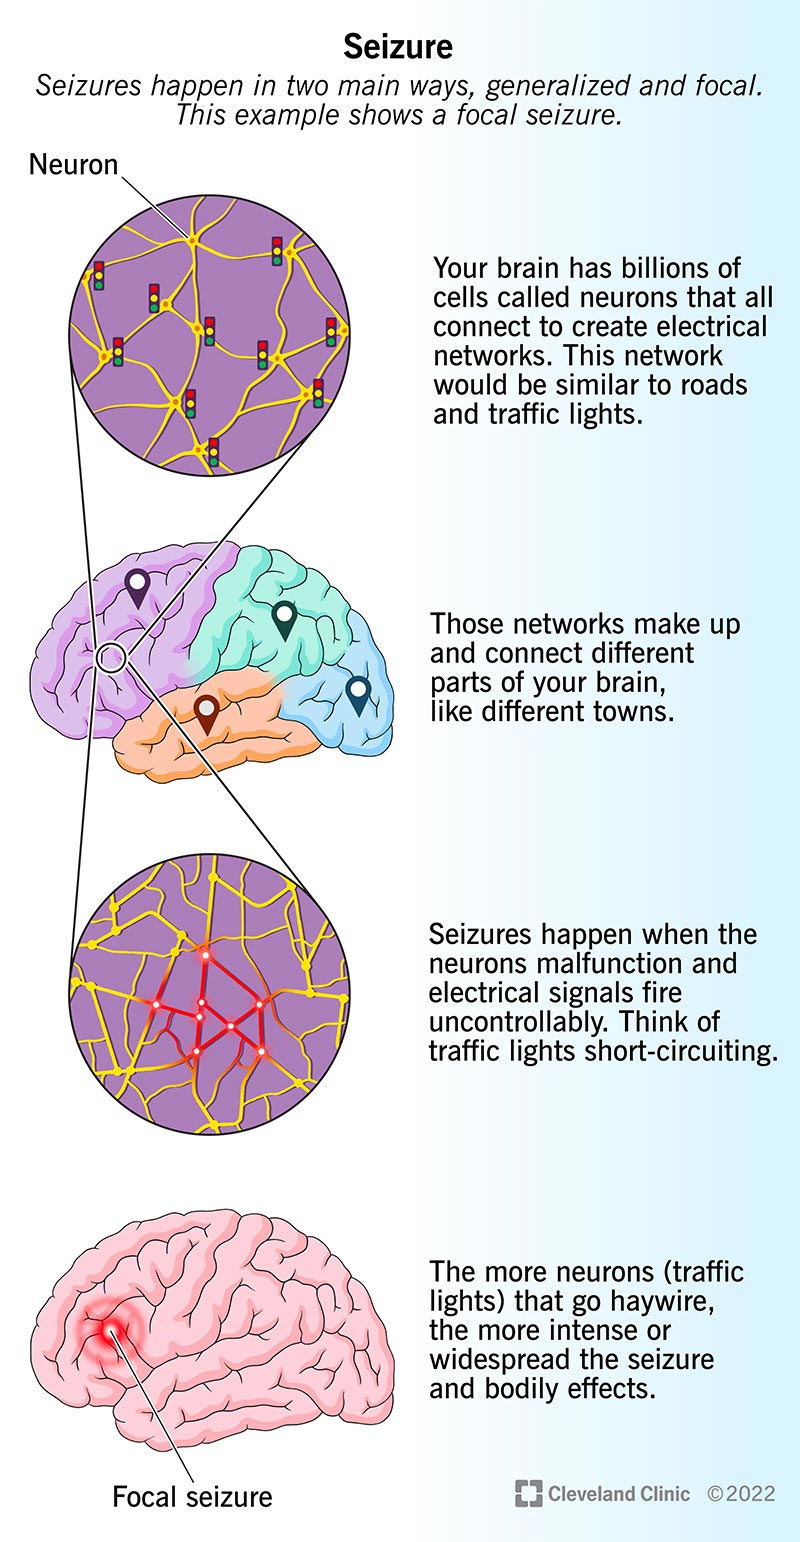 Neural networks in your brain transmit signals. Seizures disrupt this electrical flow